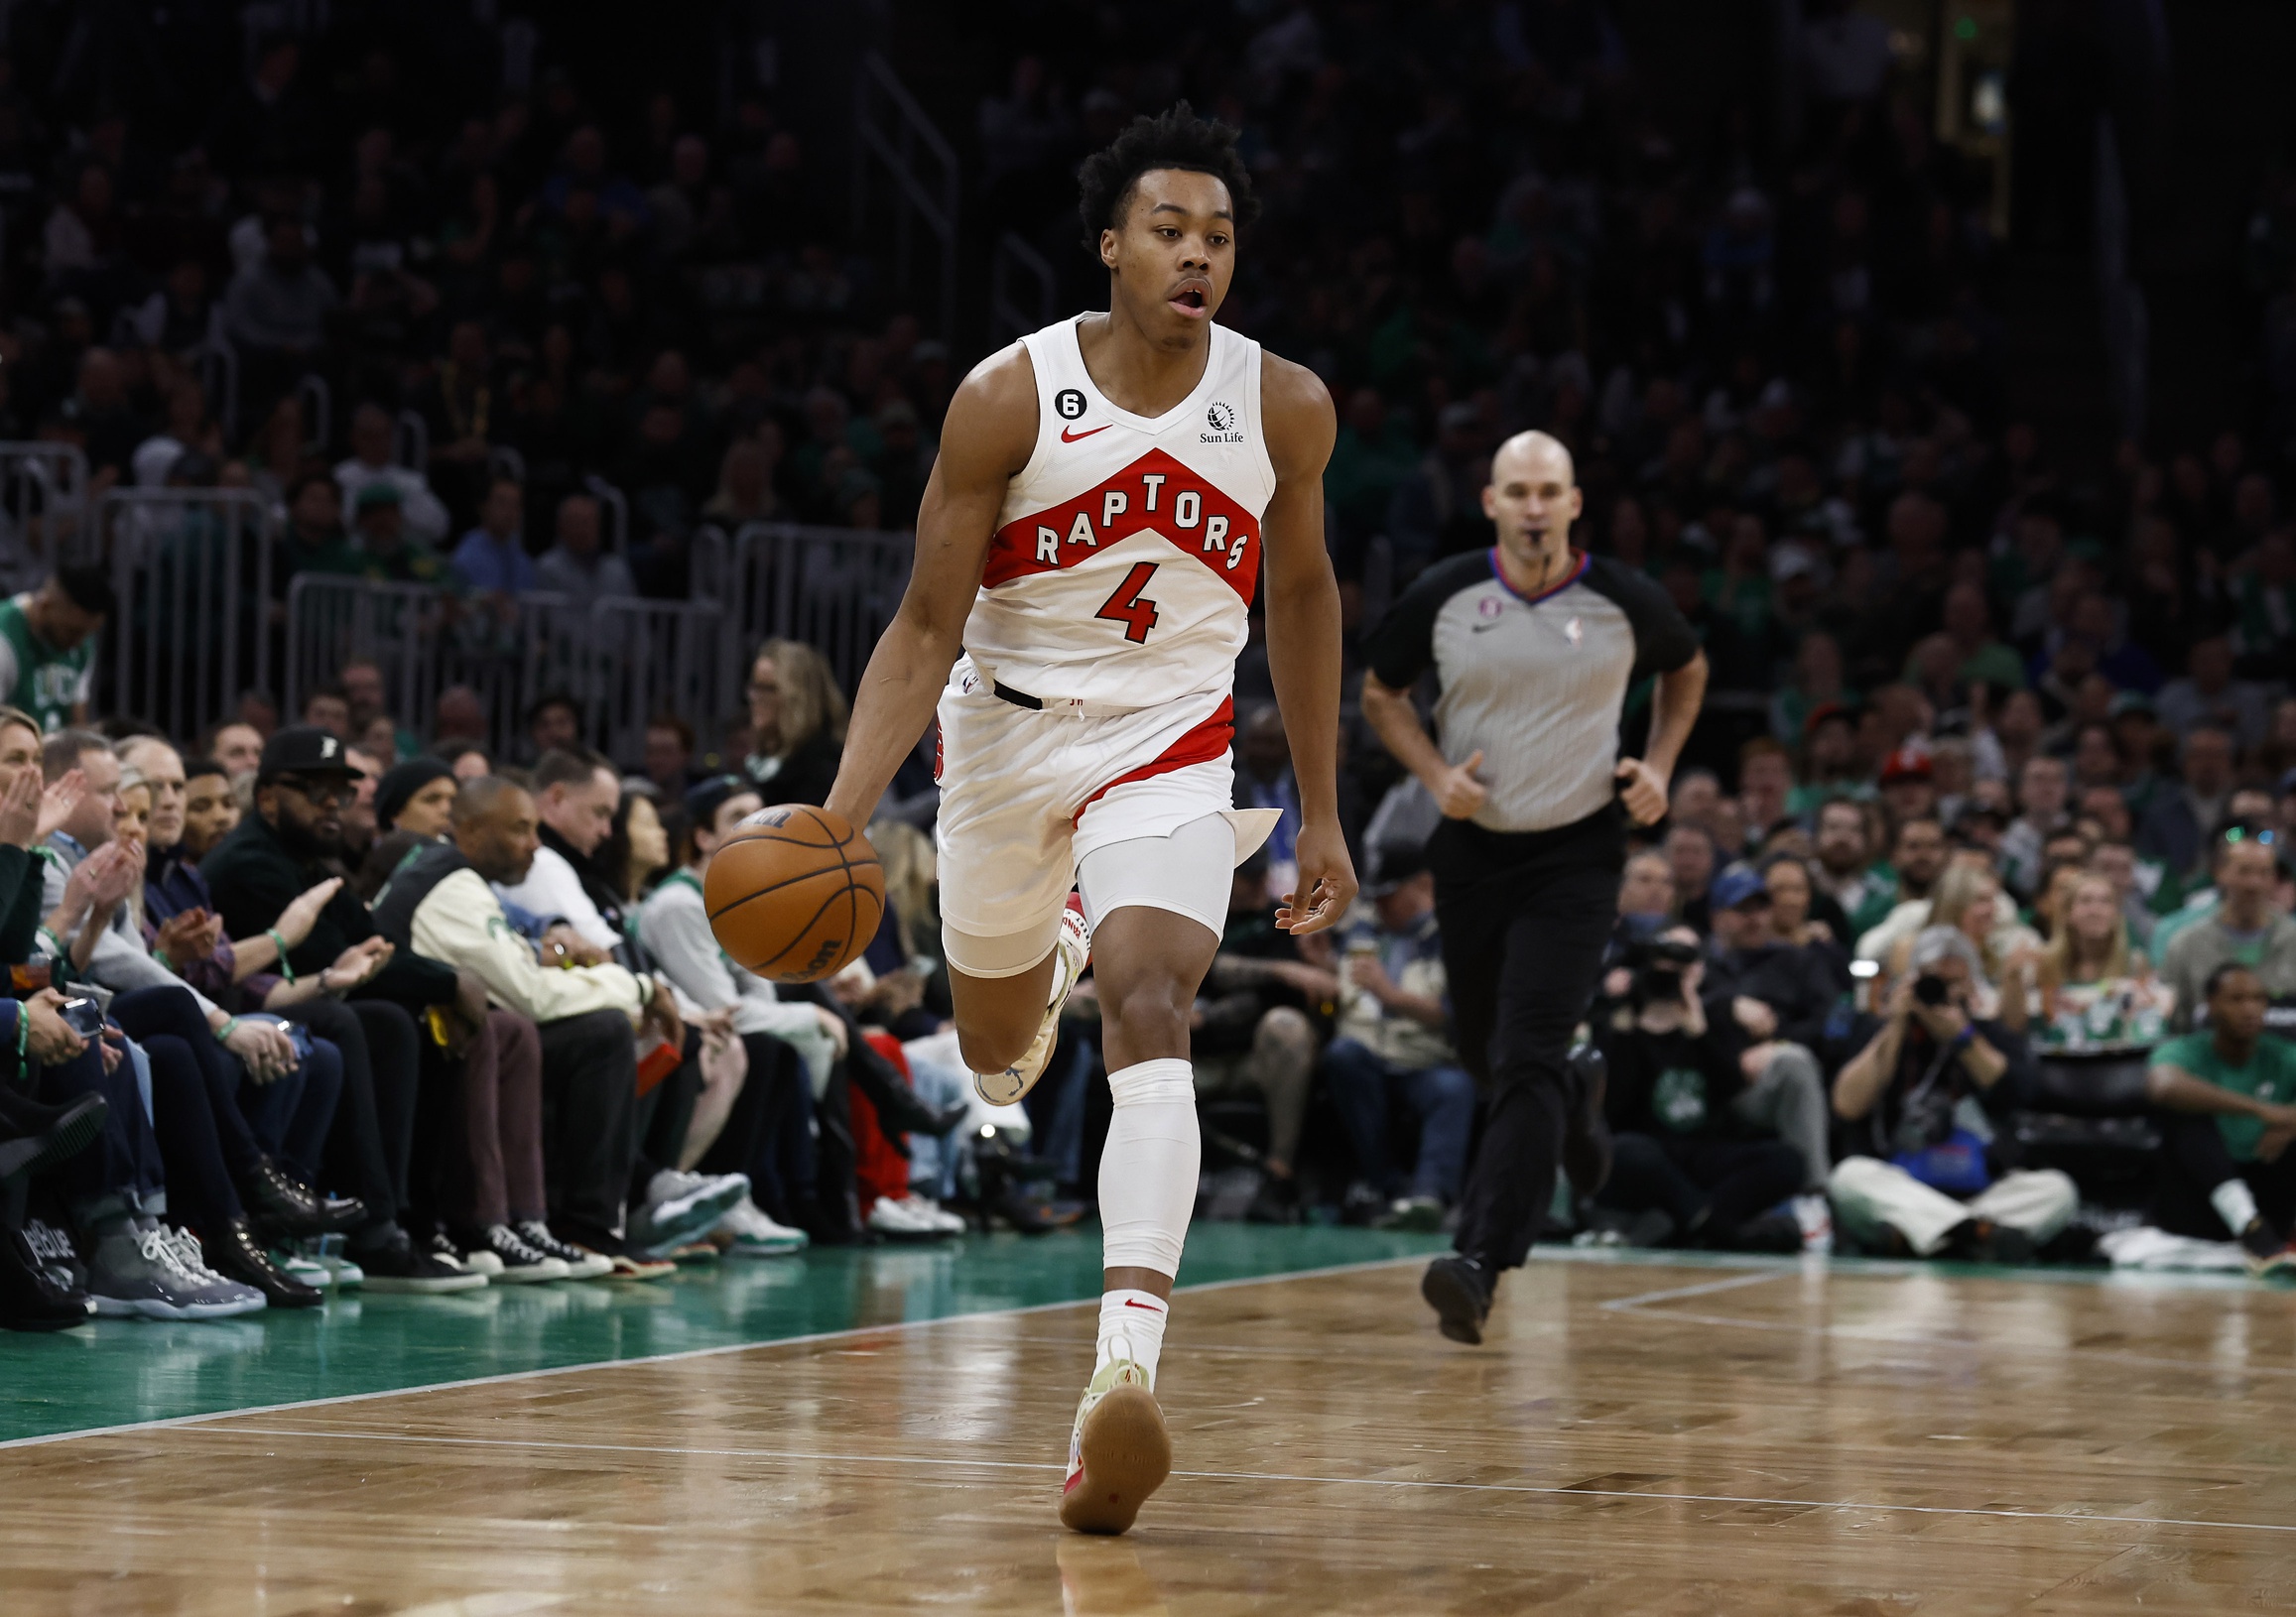 Apr 7, 2023; Boston, Massachusetts, USA; Toronto Raptors forward Scottie Barnes (4) brings the ball up the court against the Boston Celtics during the first quarter at TD Garden. Mandatory Credit: Winslow Townson-USA TODAY Sports